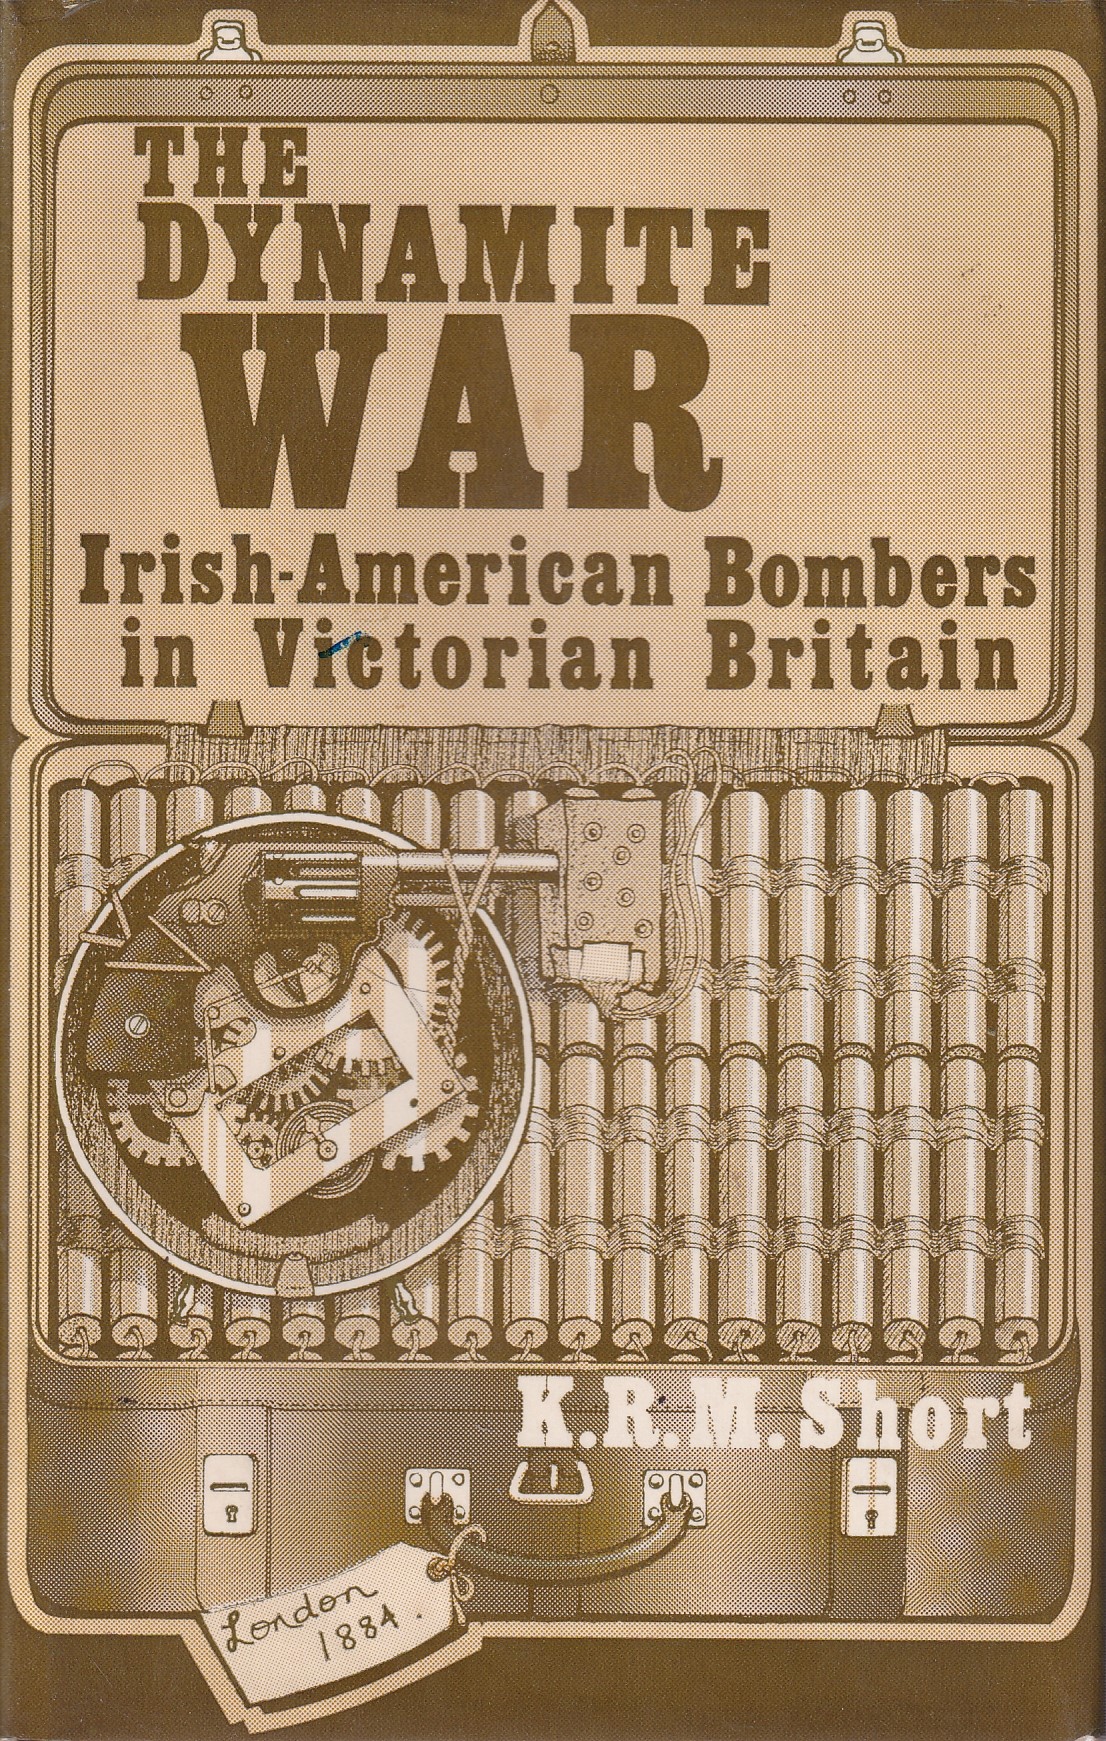 The Dynamite War: Irish American Bombers in Victorian Britain by K. R. M. Short